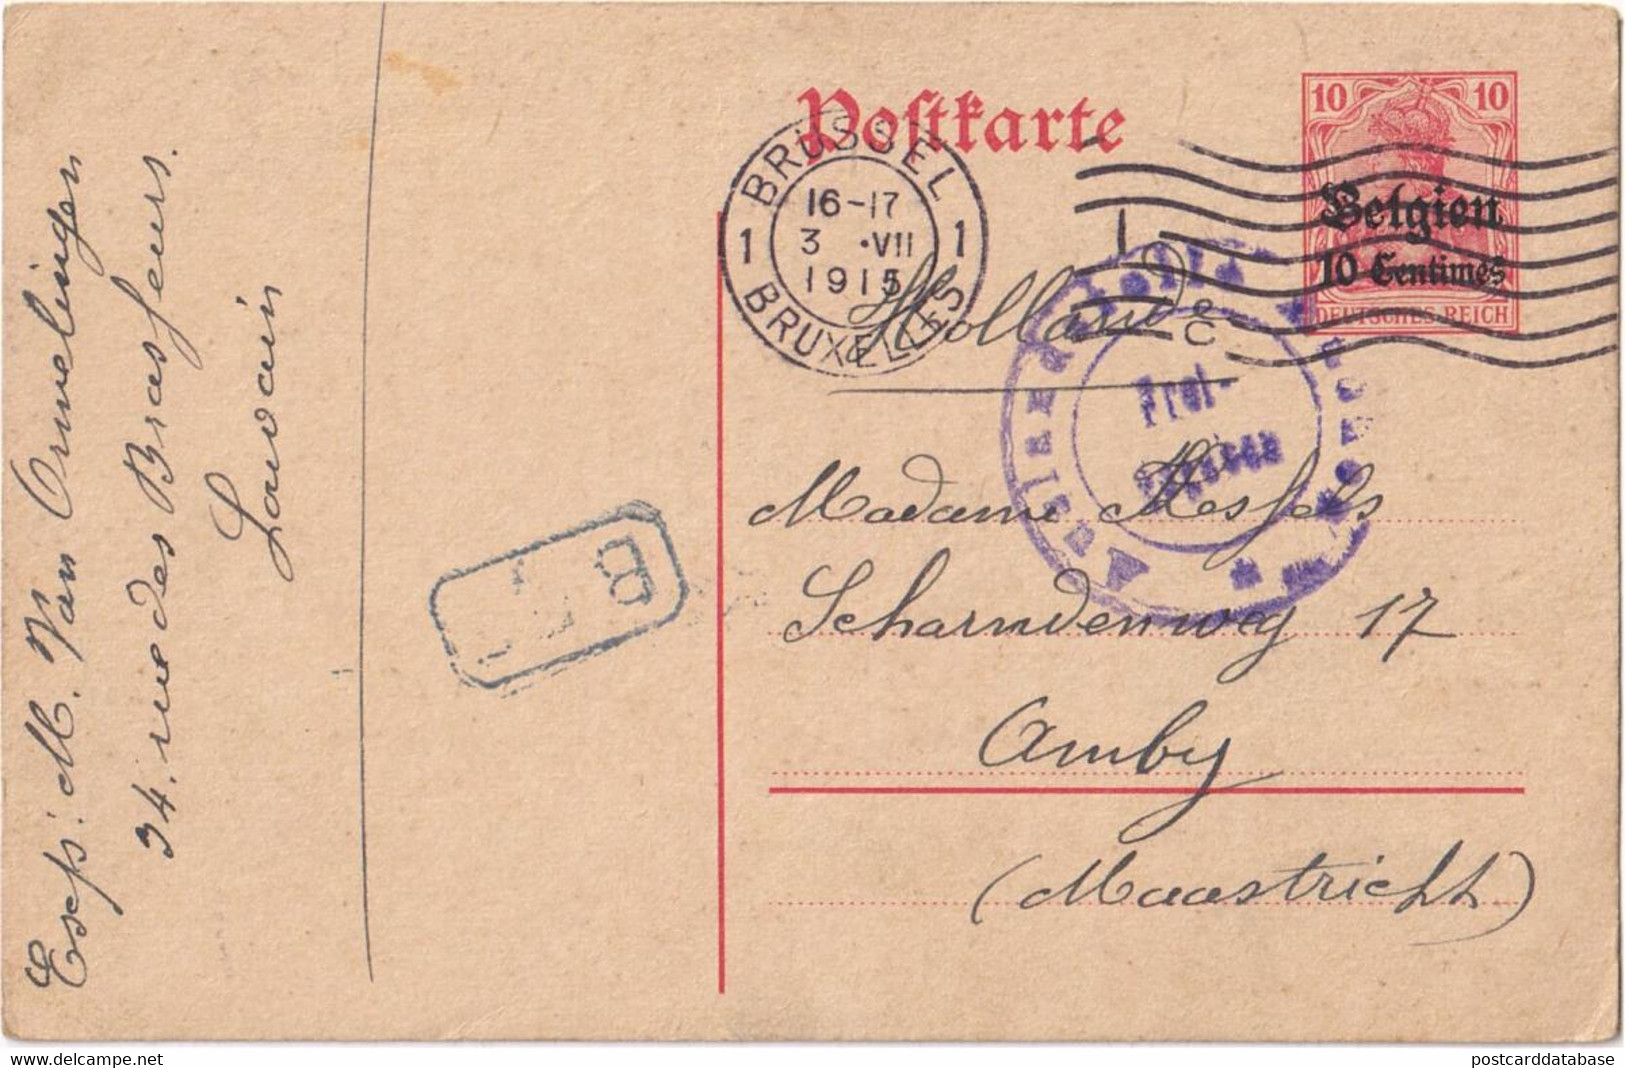 Stamped Stationery Belgium German Occupation - Sent From Brussel Bruxelles To Amby Maastricht - Occupation Allemande